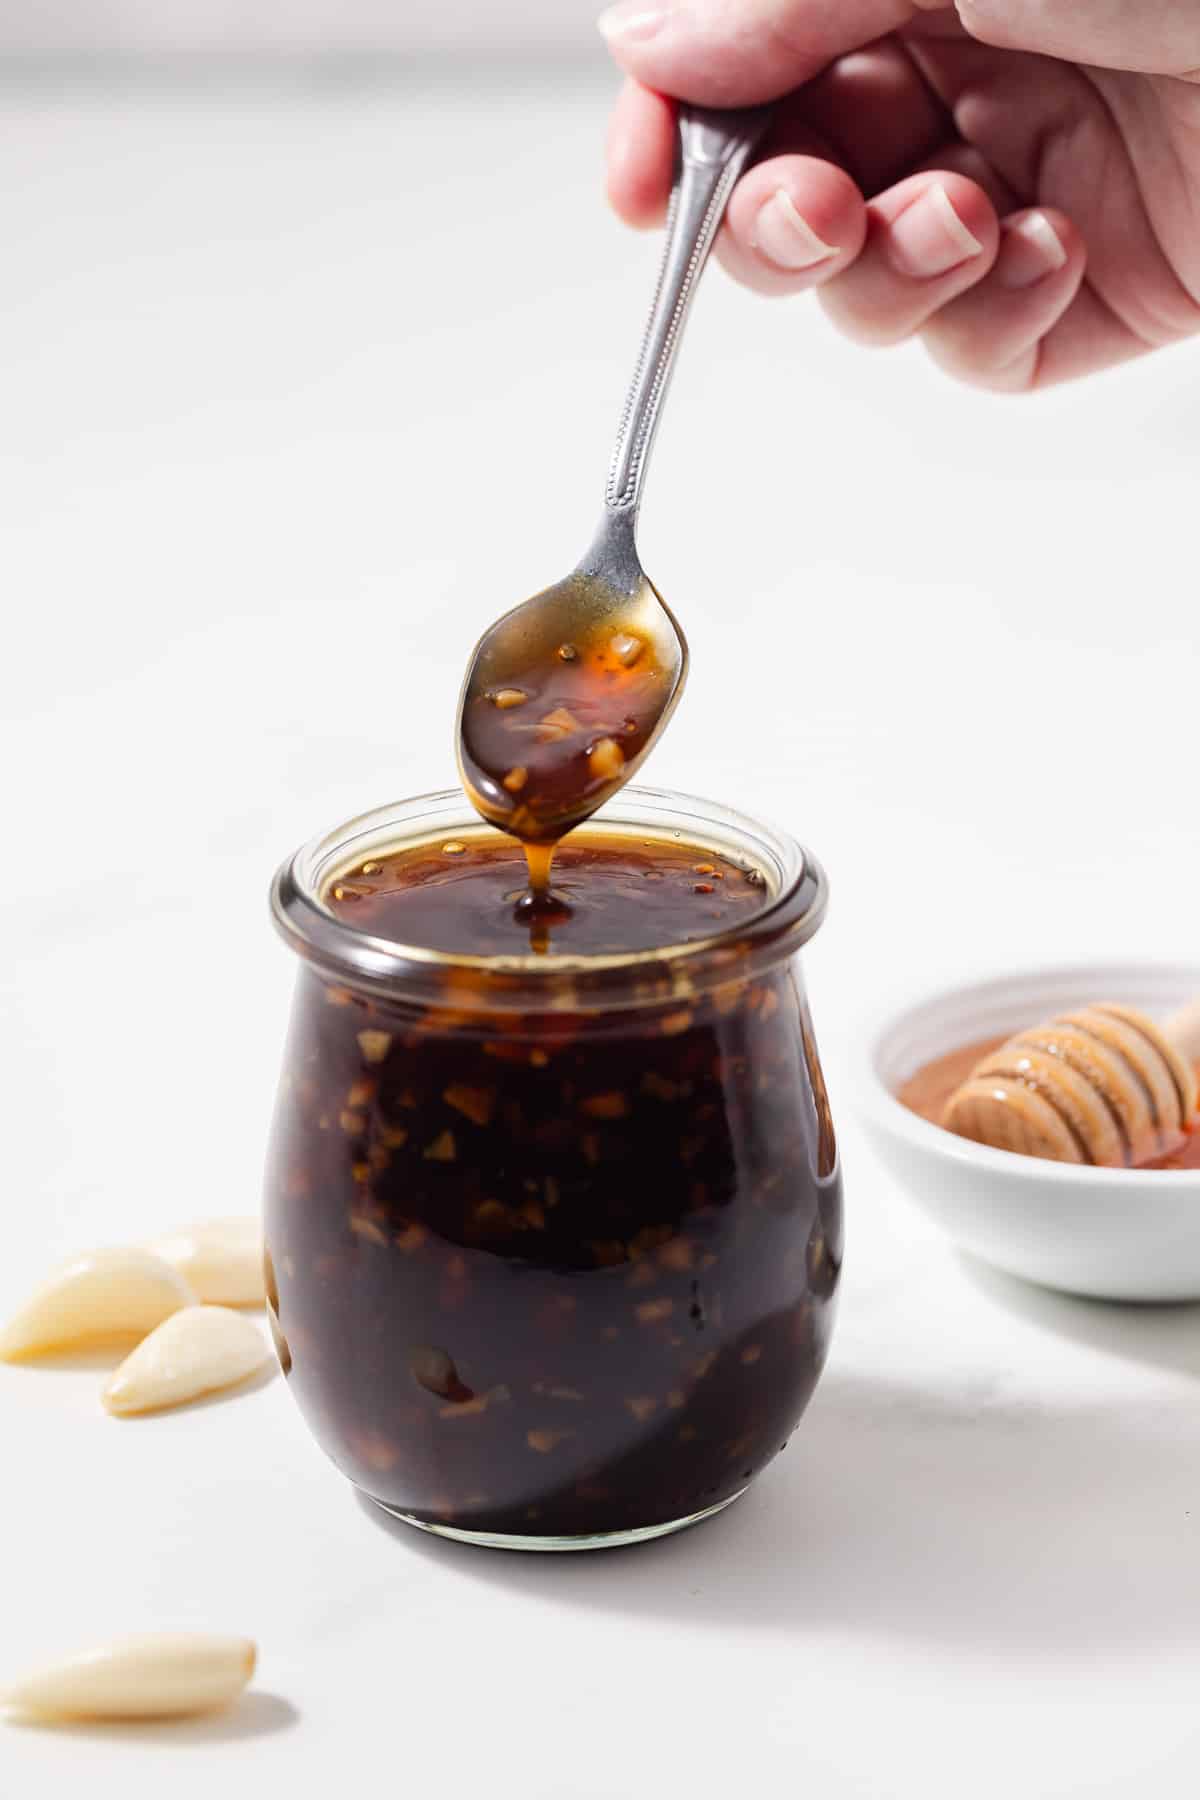 A spoon scooping out honey garlic sauce from a jar.